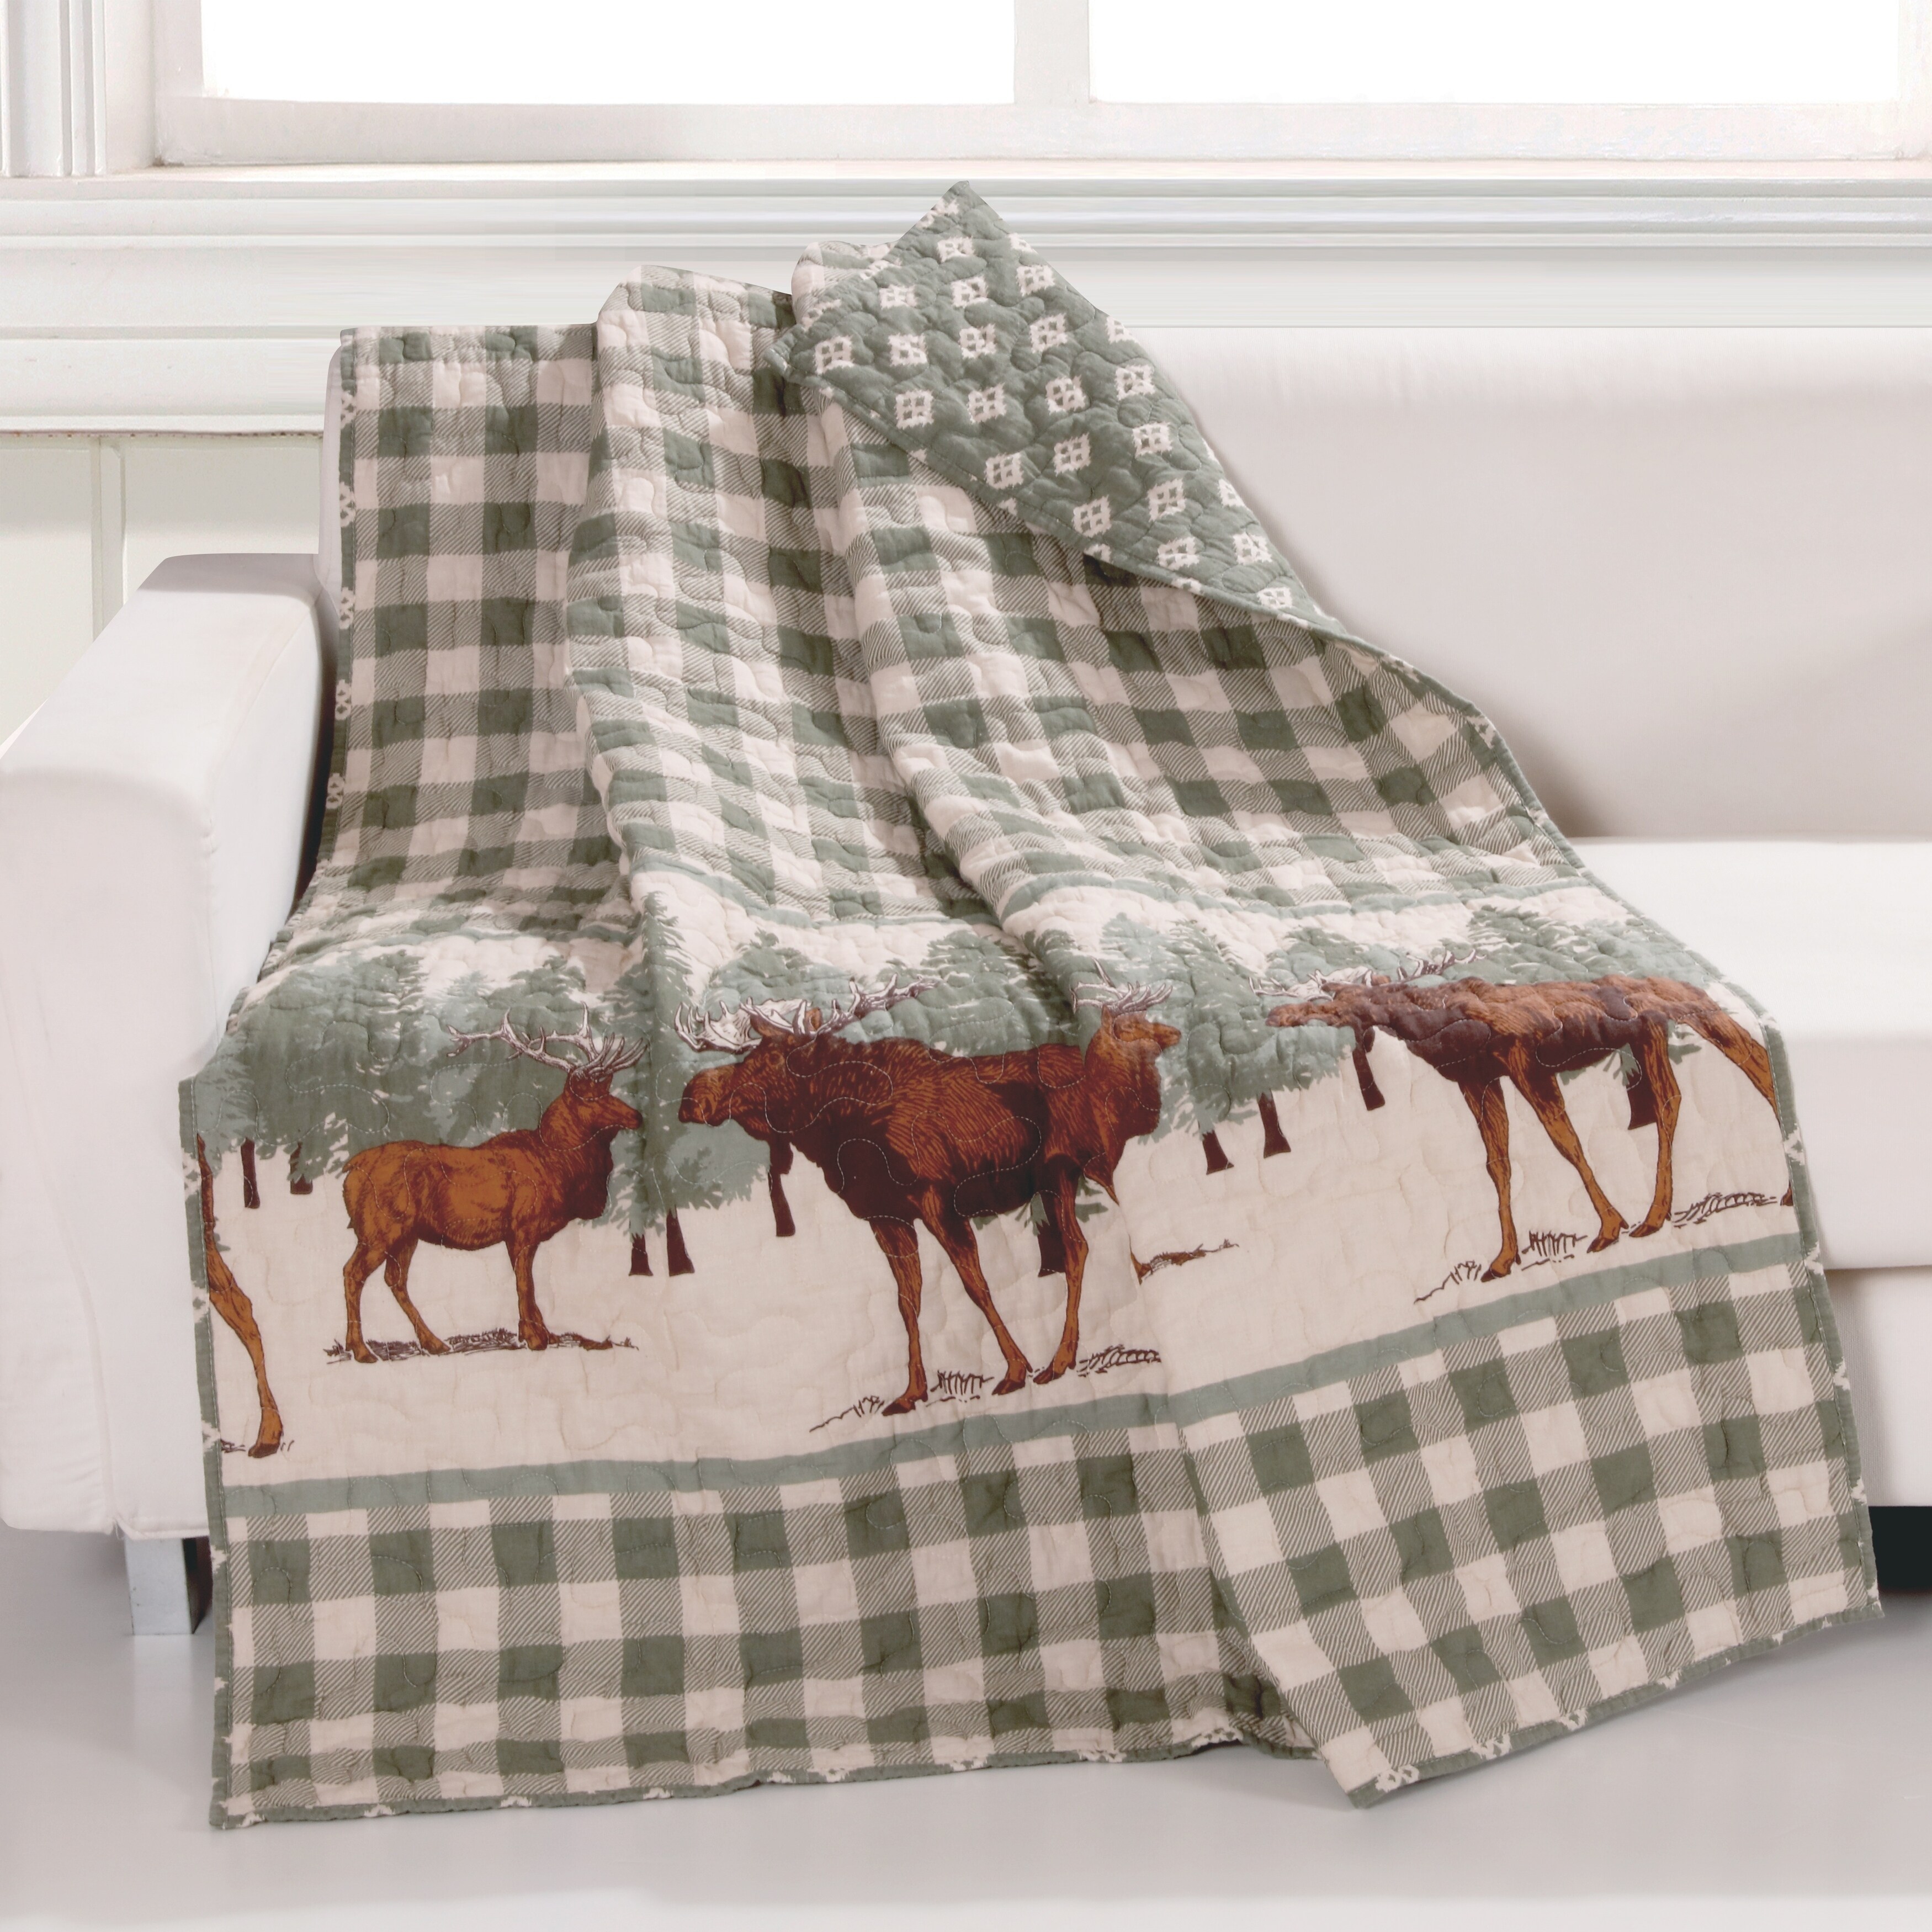 Greenland Home Fashions Greenland Home Moose Creek Quilted Throw Blanket, 50x60-inch - image 1 of 5